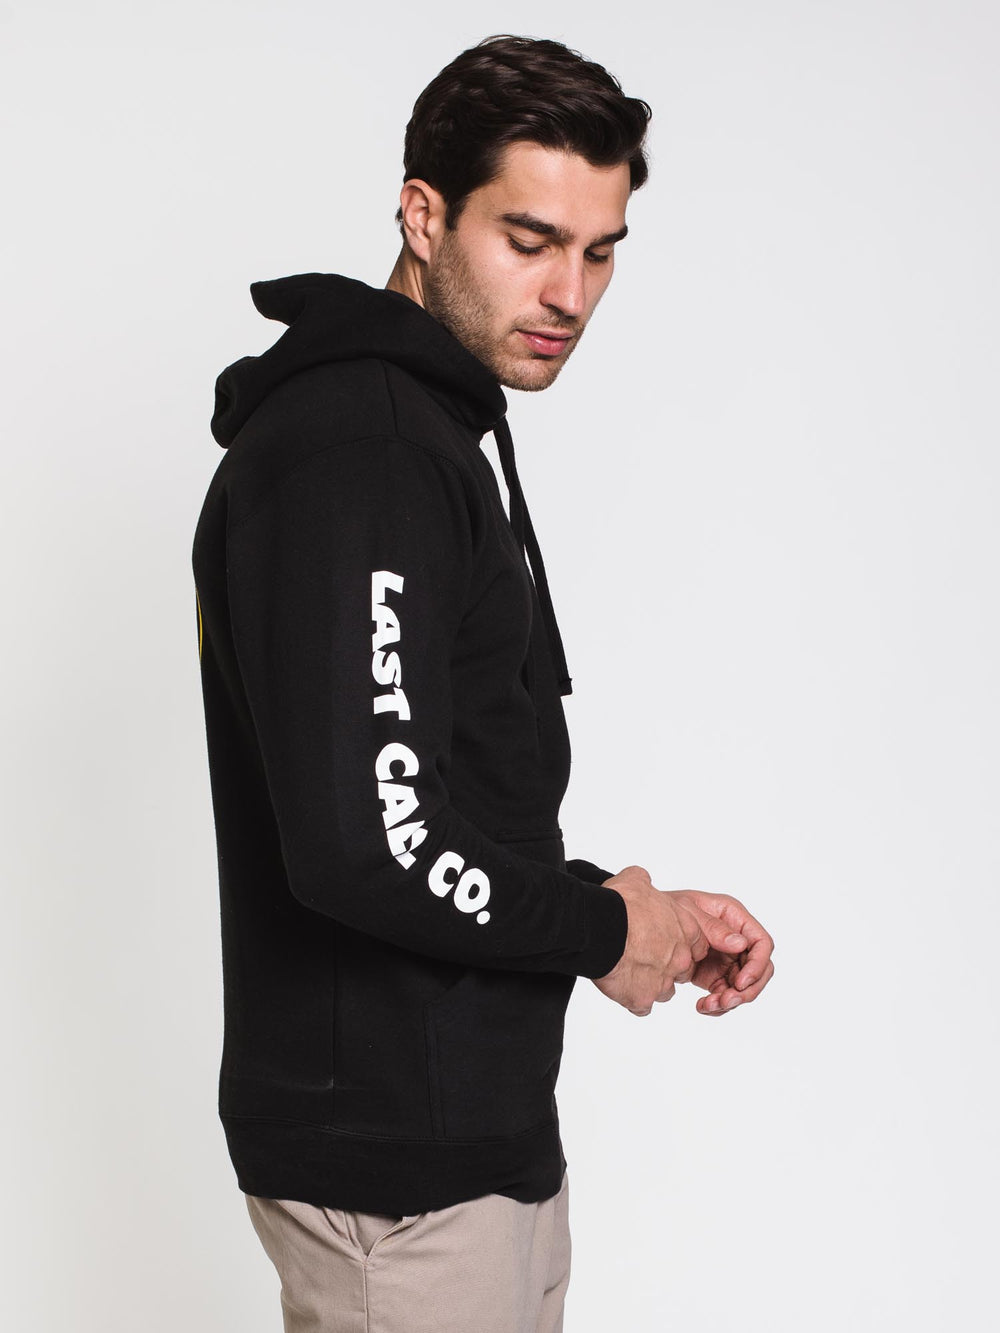 LAST CALL DRINK SLOW PULLOVER HOODIE- BLACK - CLEARANCE